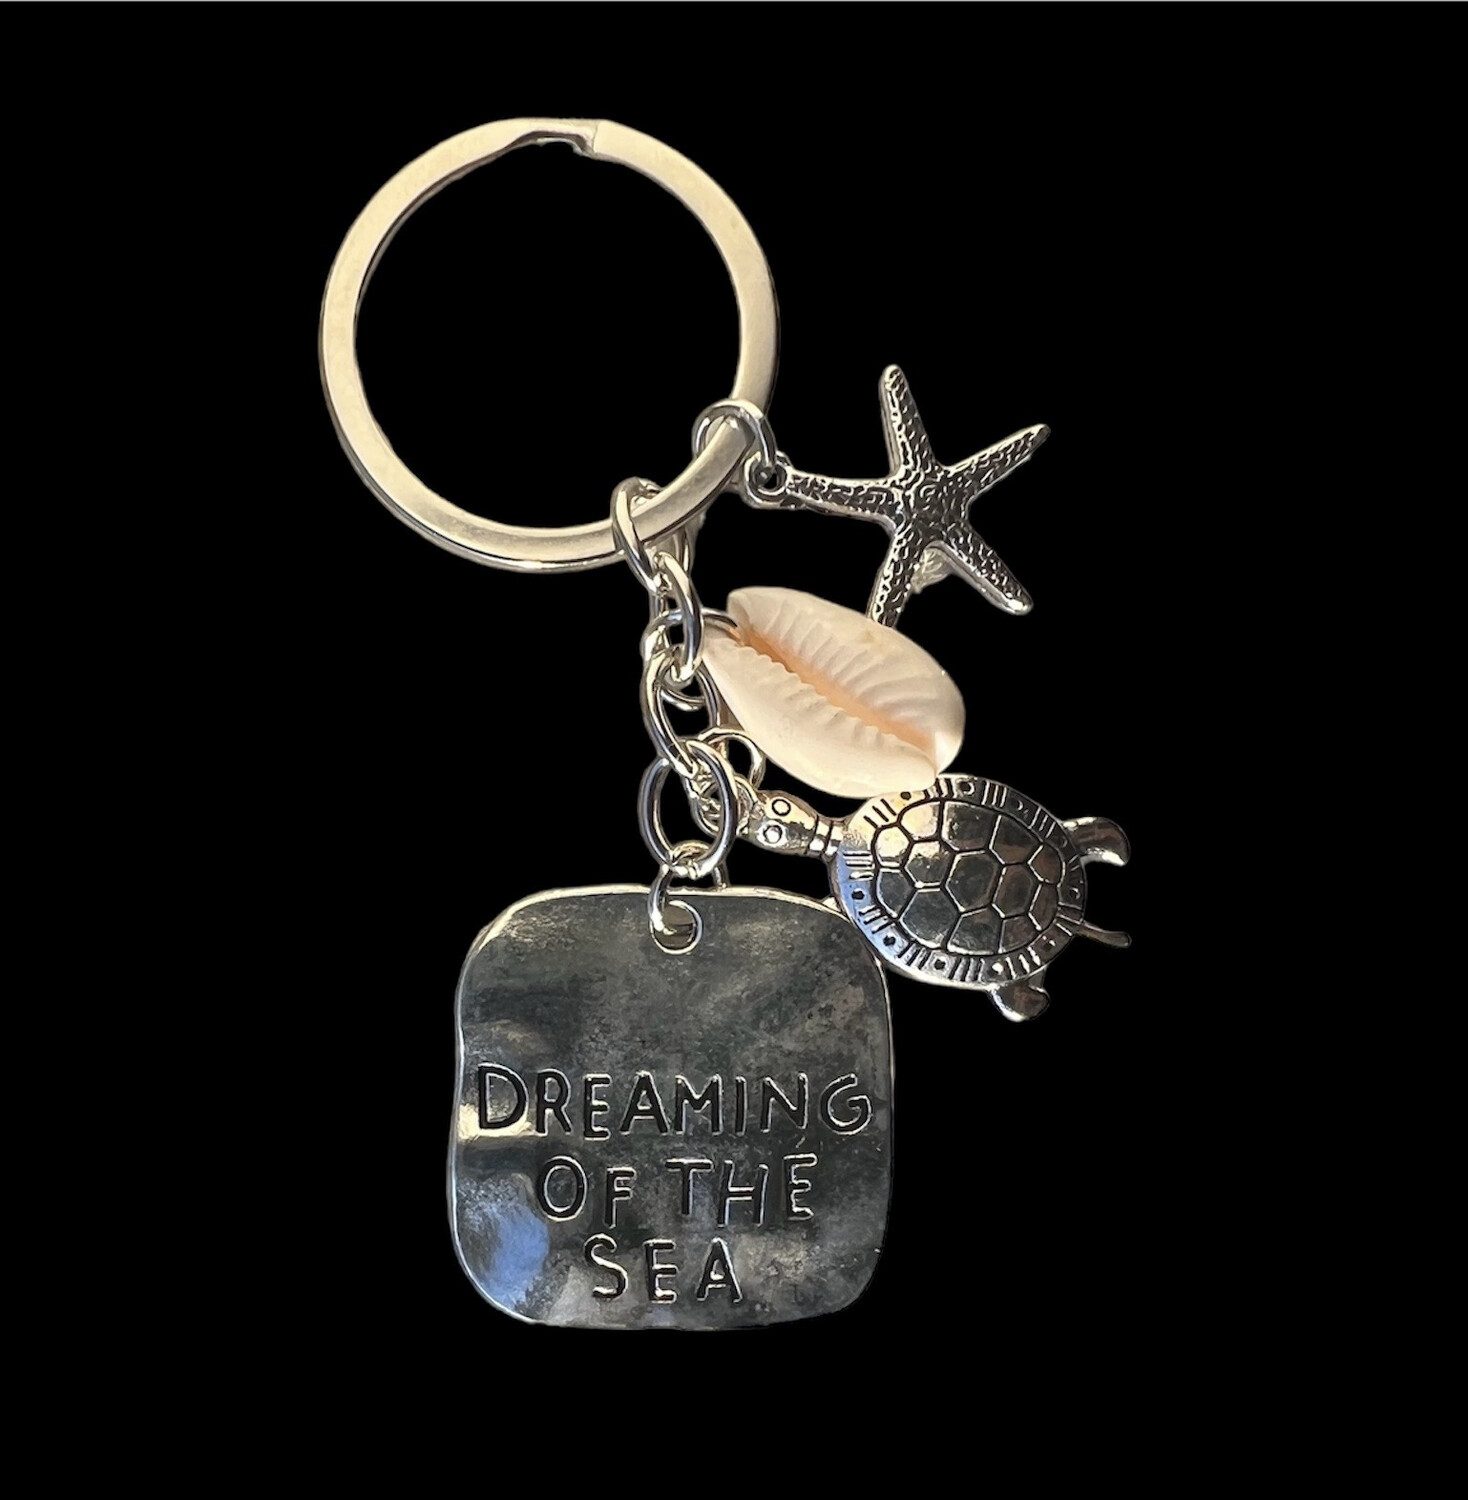 Dreaming Of The Sea Keychain